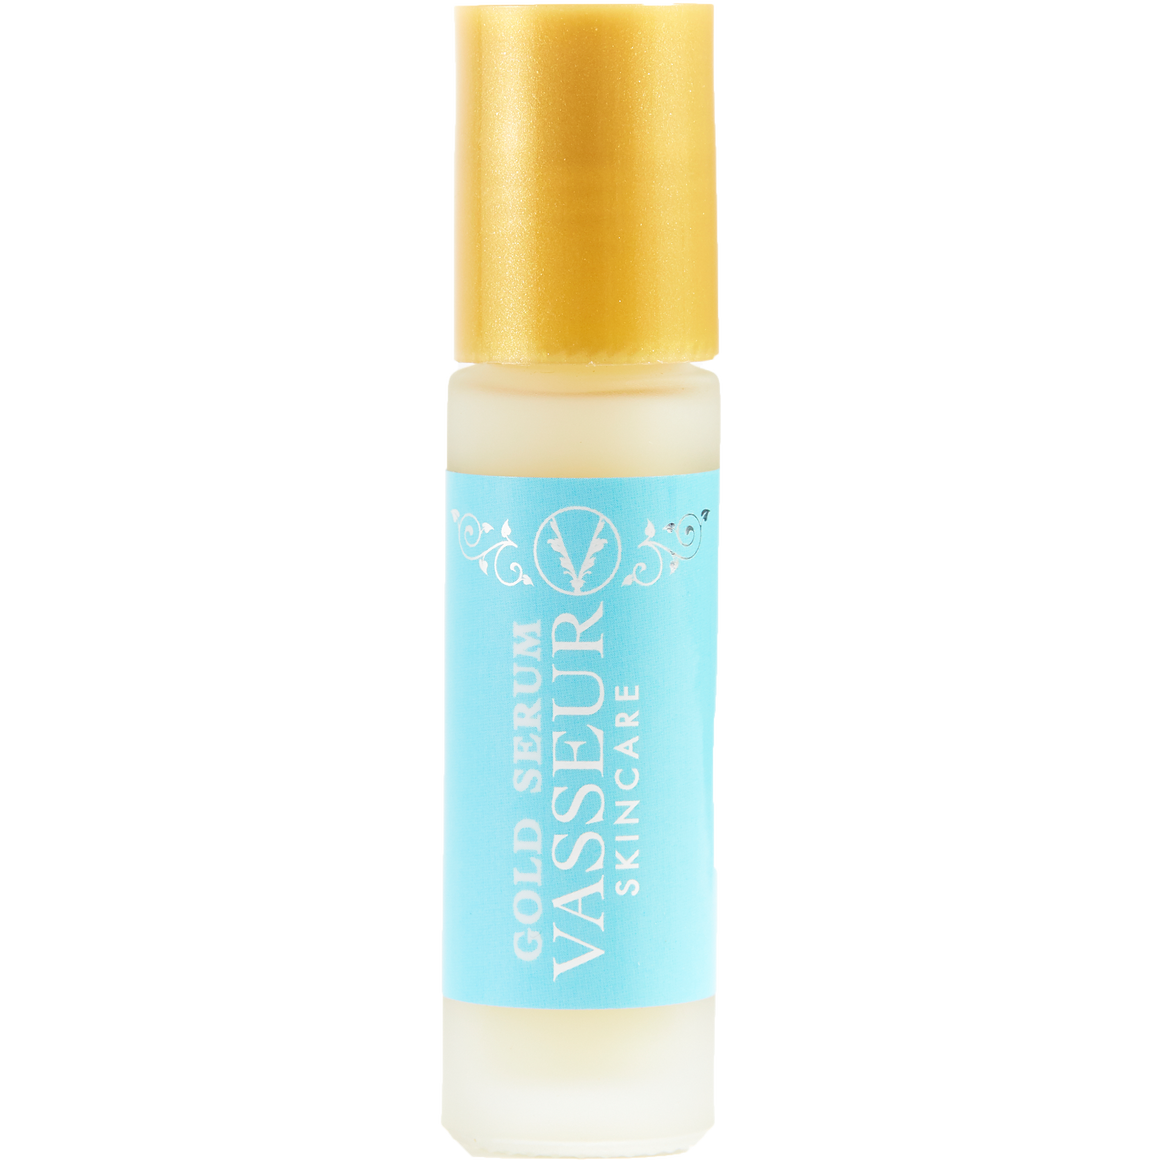 hydrates and firms under your eyes, helps to heal and repair skin, great for use after laser treatments and peels, helps reduce wrinkles, anti aging, hydrating 